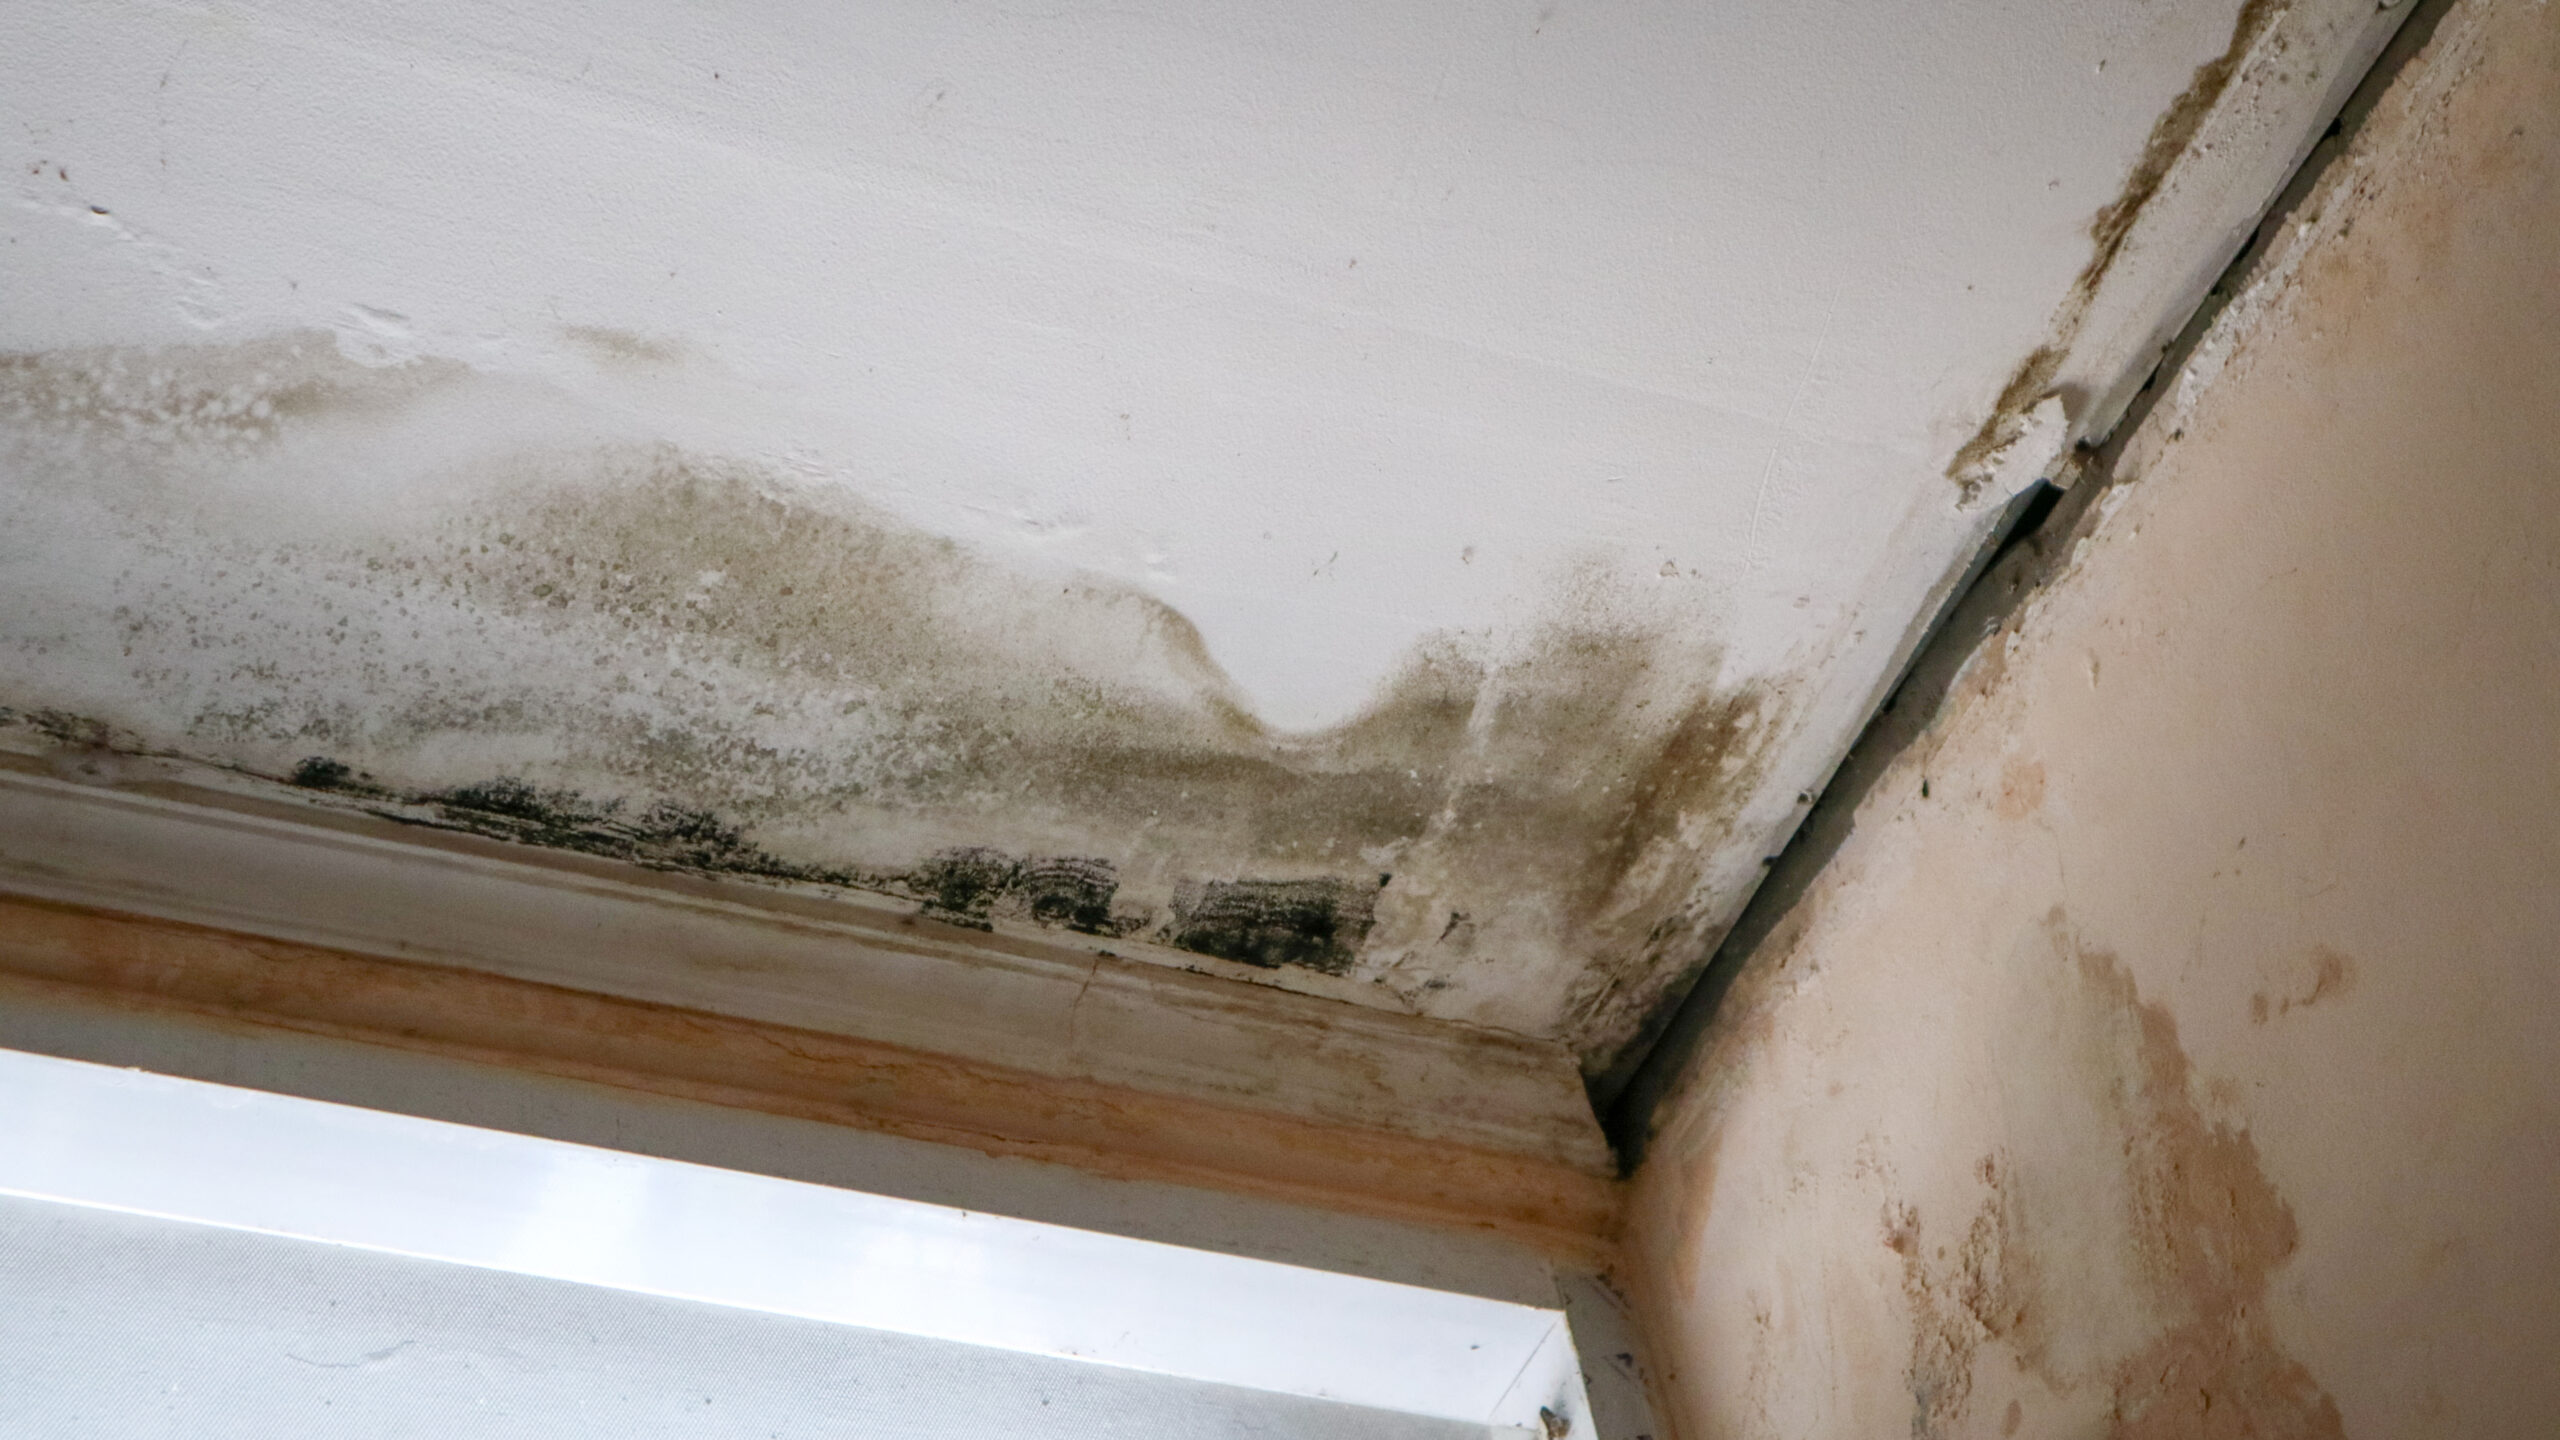 Ceiling corner with water damage exposing mold - RV slide-out water damage repair